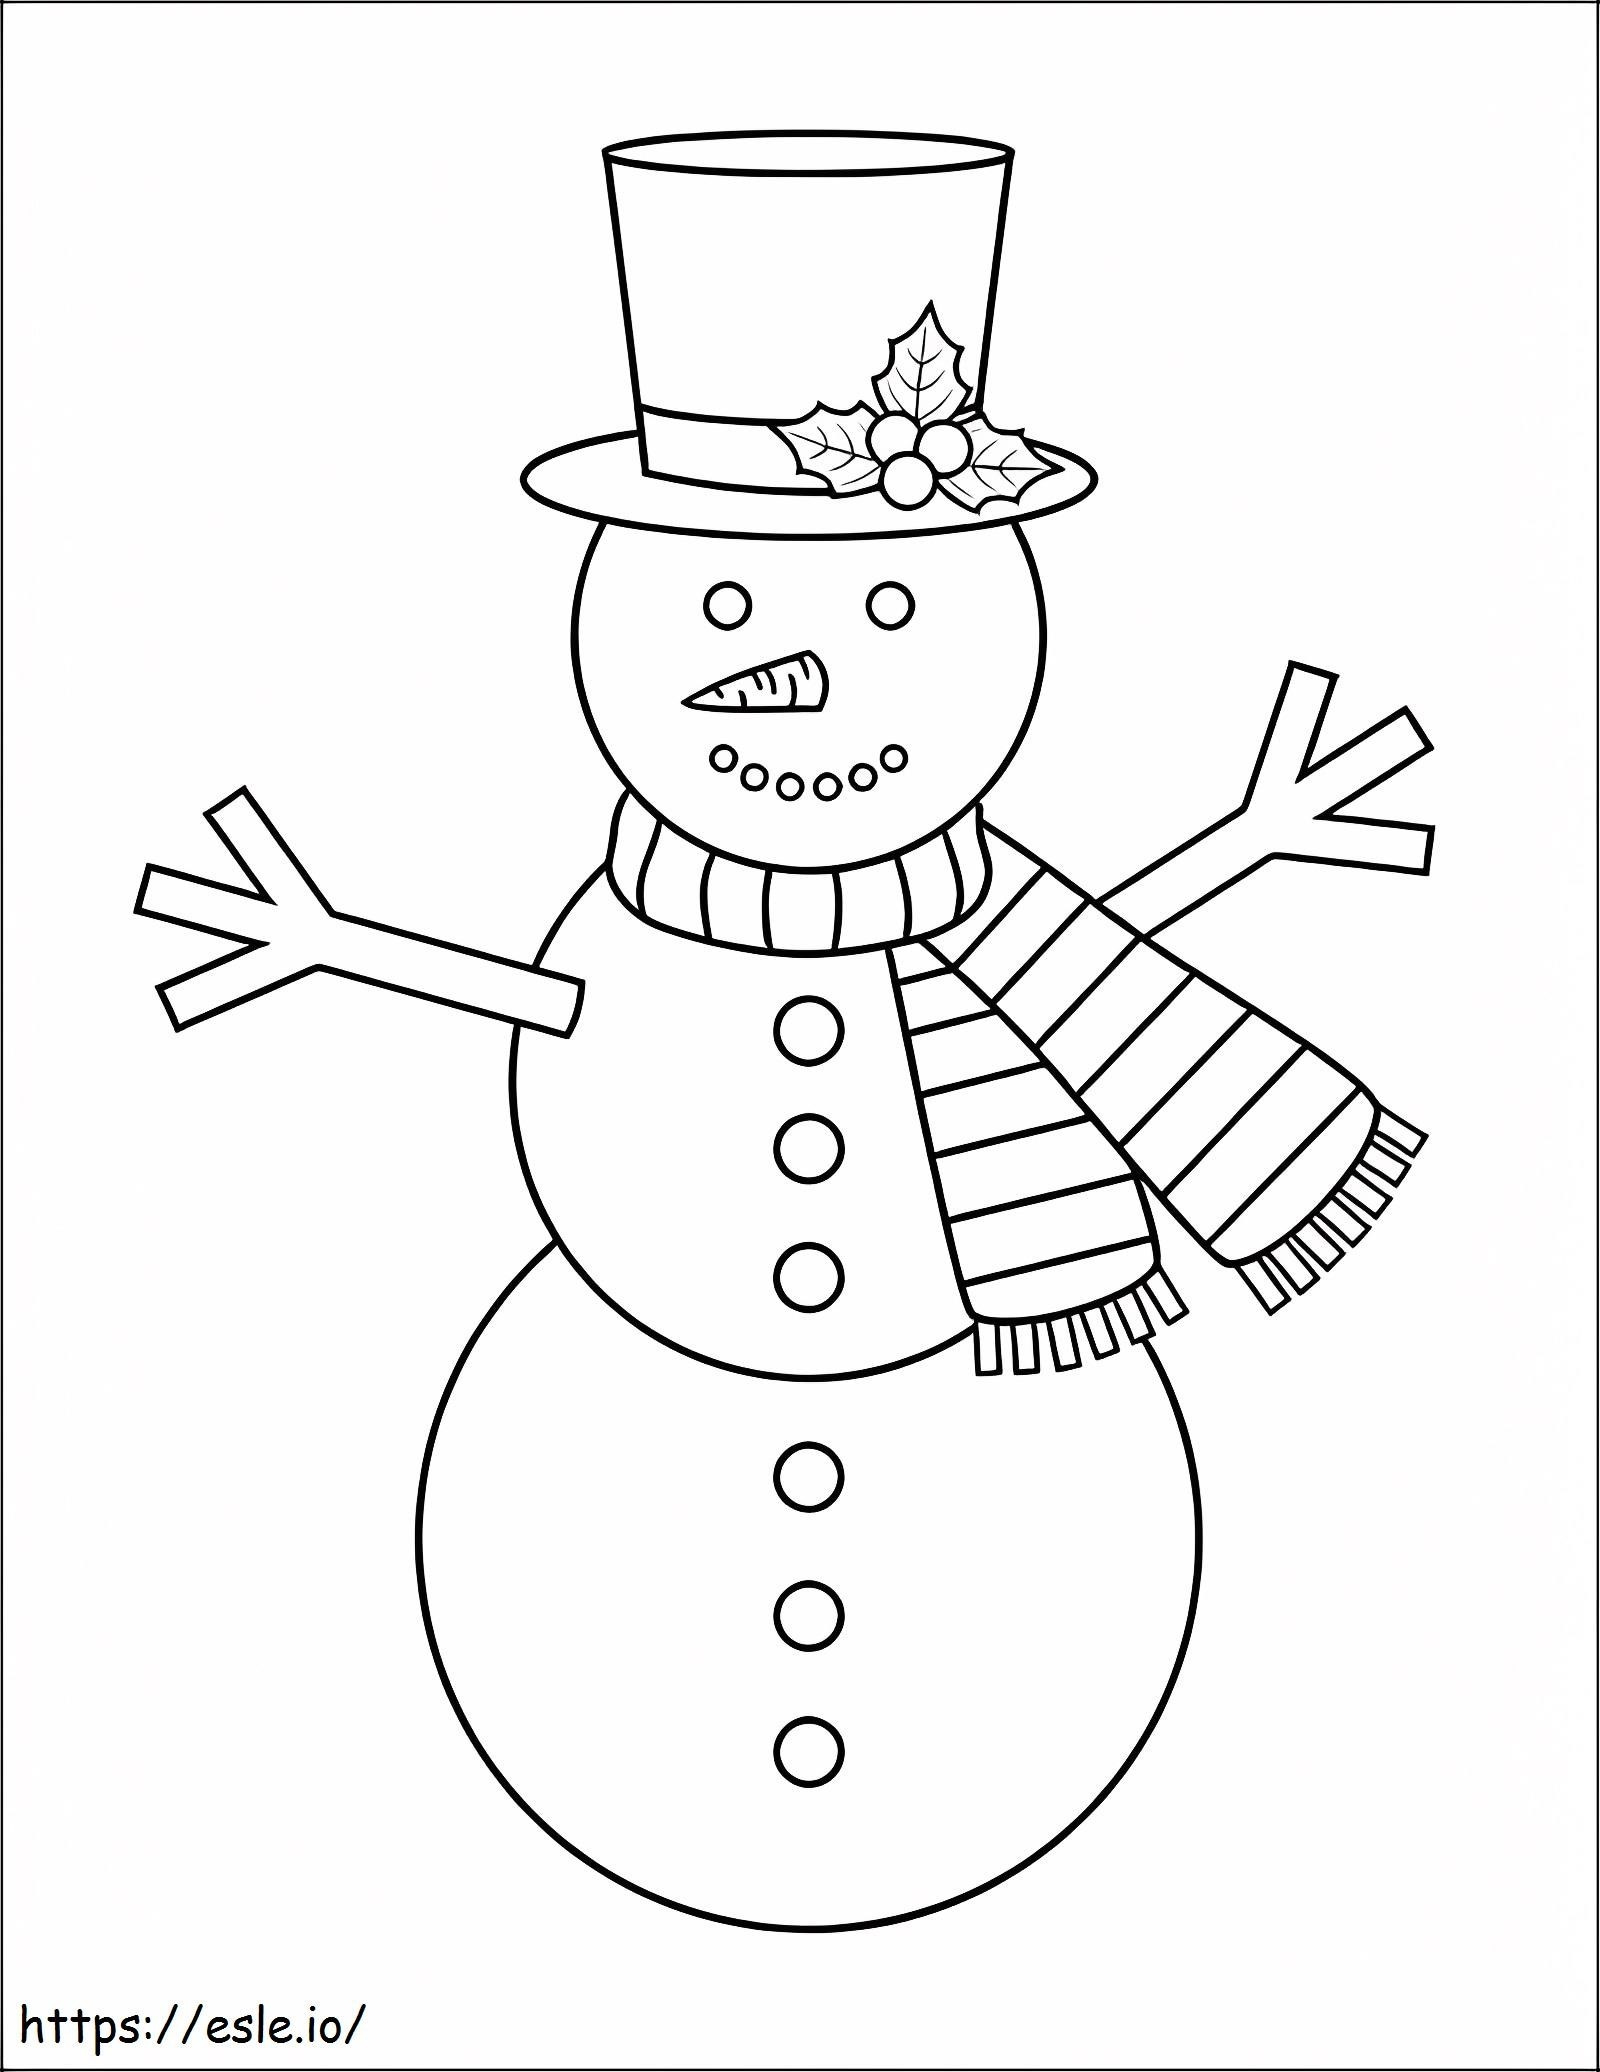 Gentle Snowman coloring page